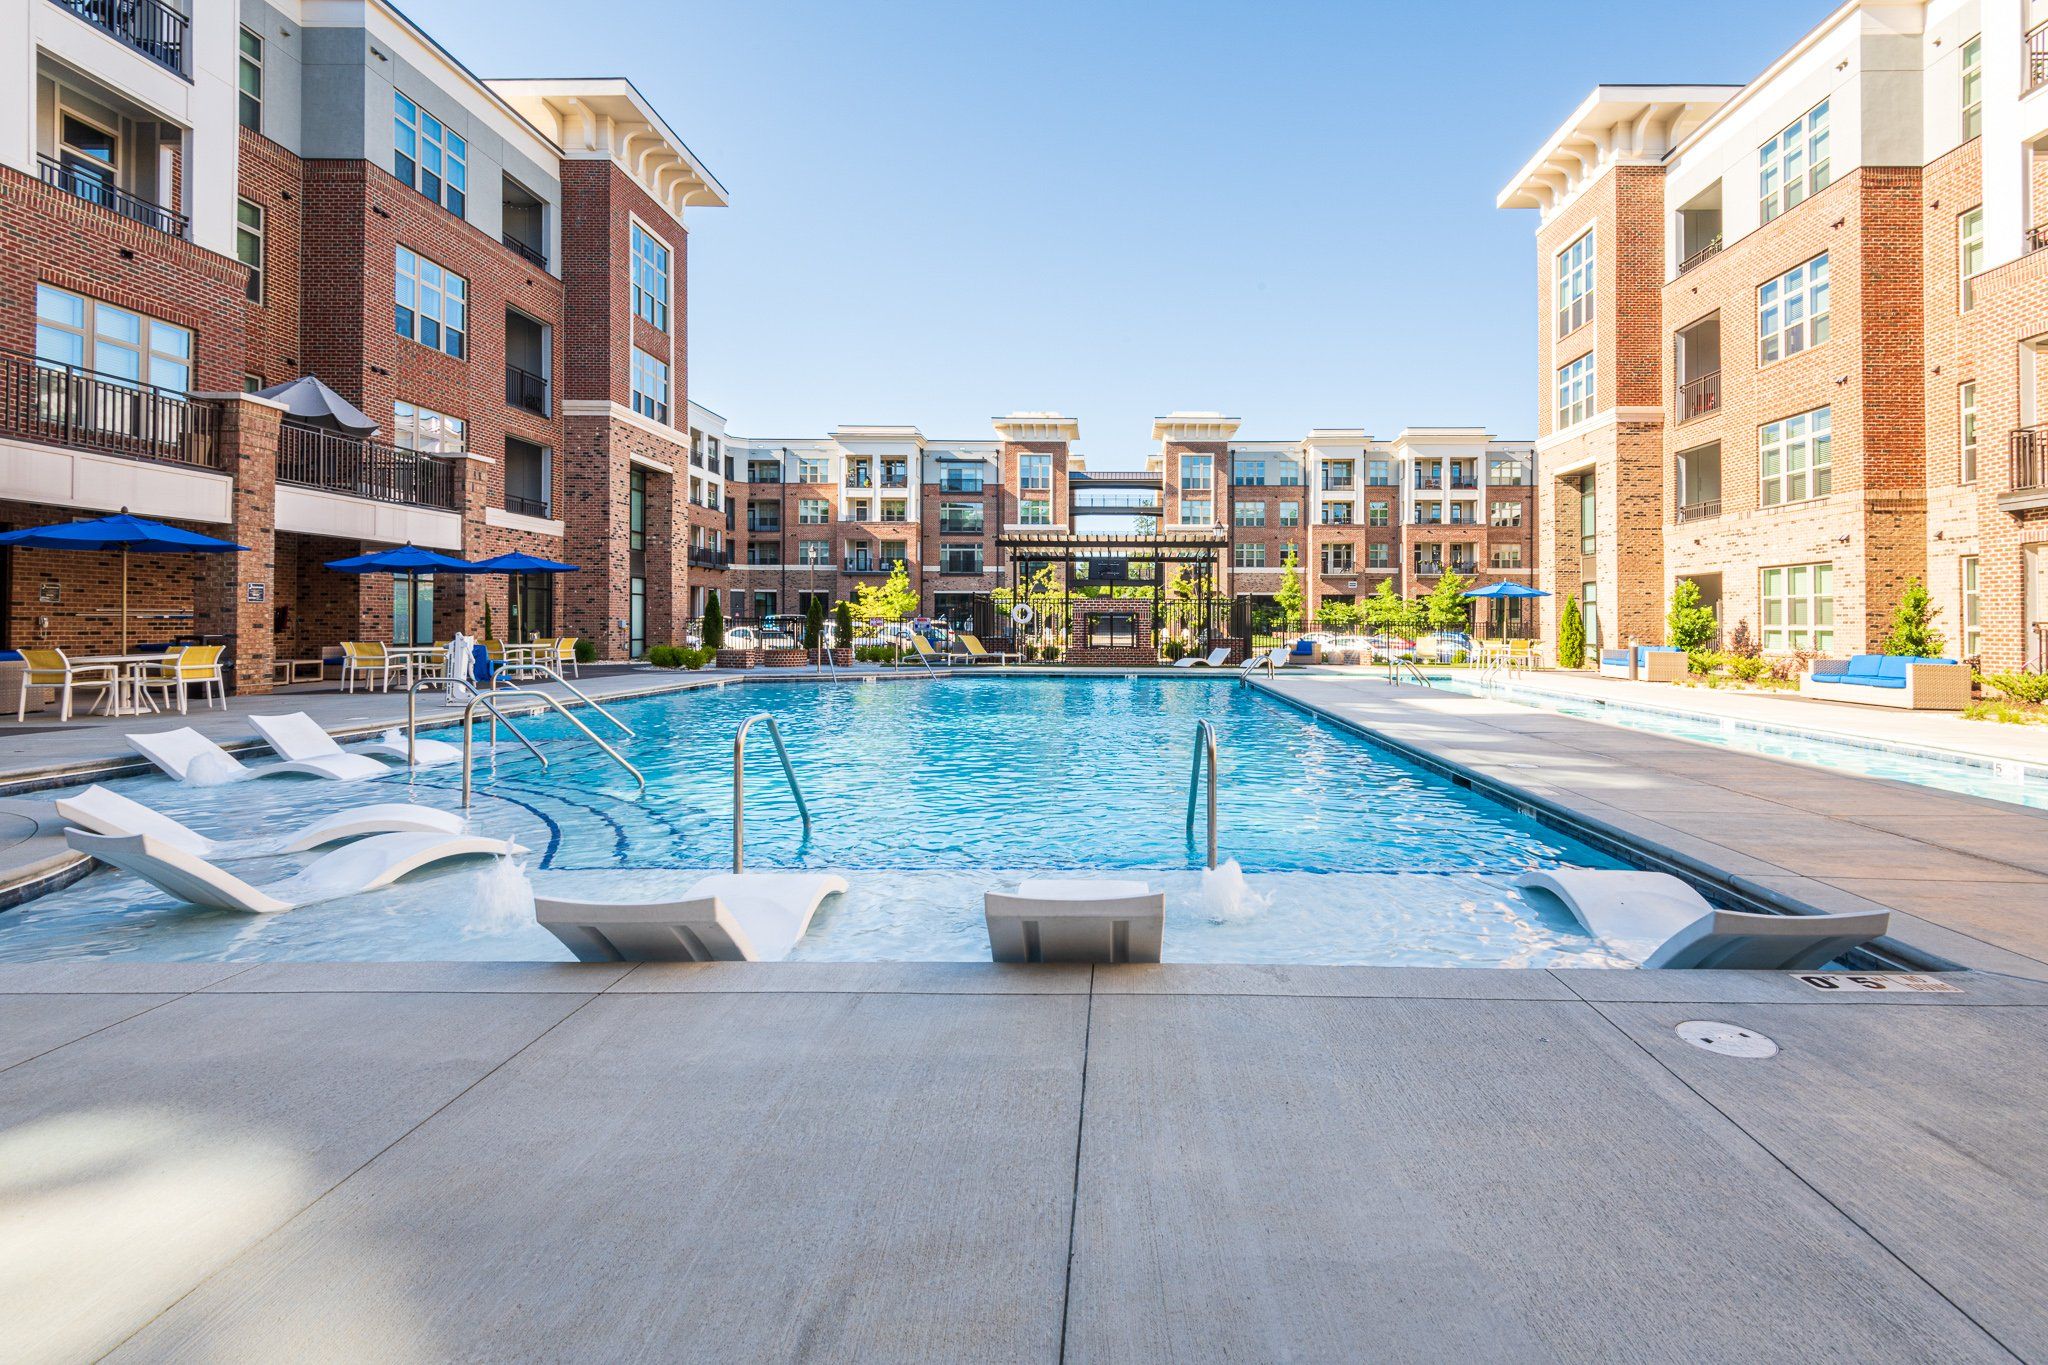 Outdoor pool amenity at Carraway Village with lounge chairs